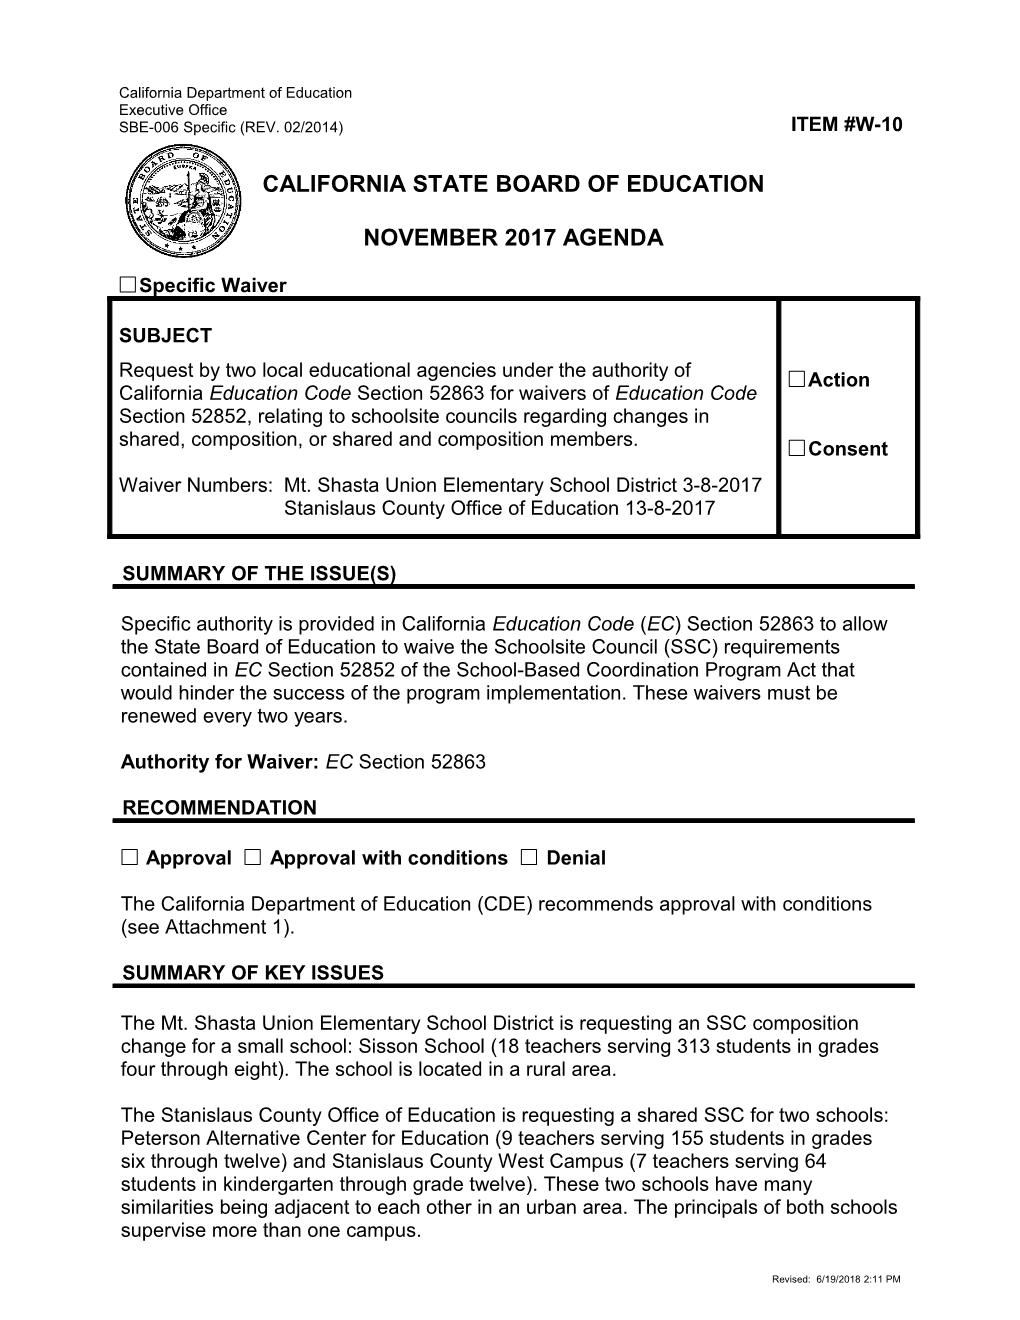 November 2017 Waiver Item W-10 - Meeting Agendas (CA State Board of Education)